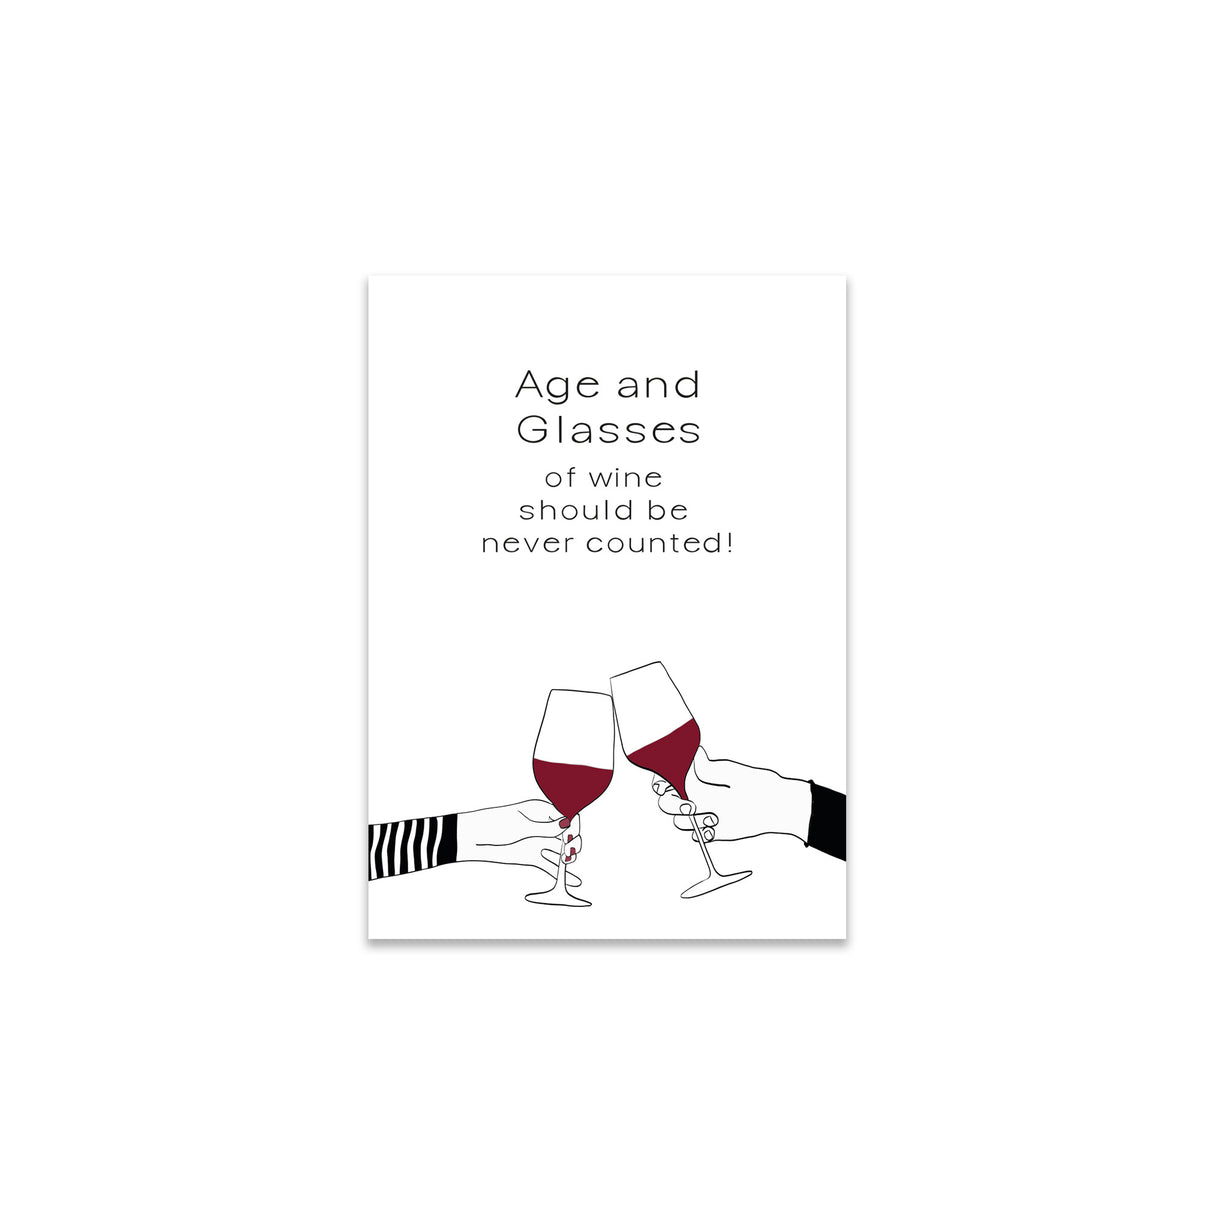 Age and glasses of wine should be never counted - Magnet